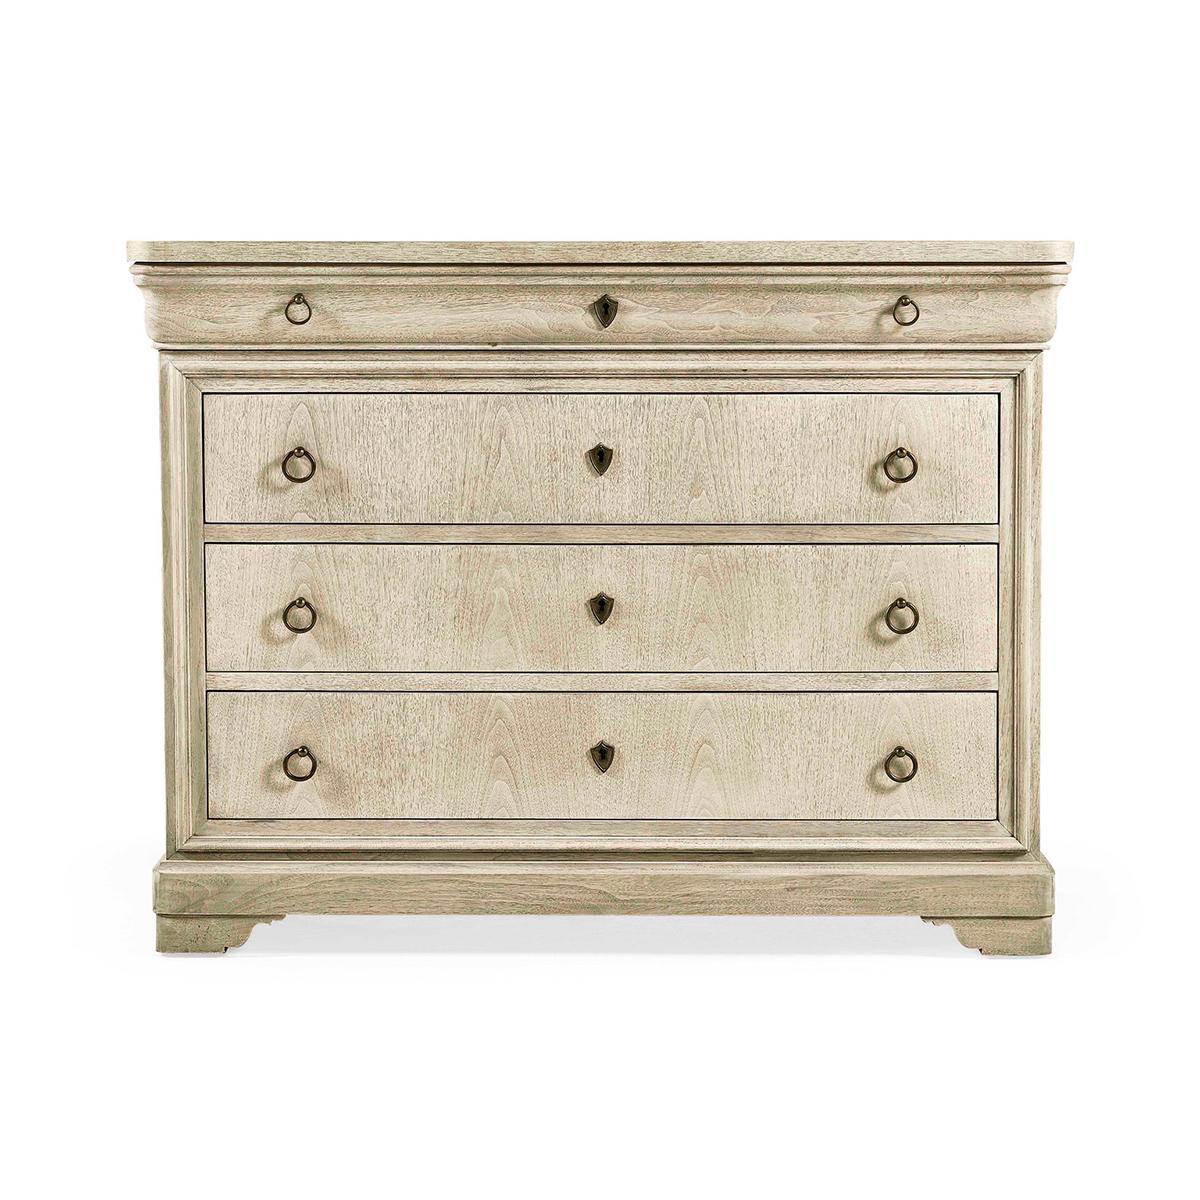 Louis Phillipe Dresser, with clean lines, this four-drawer dresser is a sophisticated balance and has a functional aesthetic, a quintessential expression of timeless charm and old-world refinement. With a bleached walnut finish that elevates this